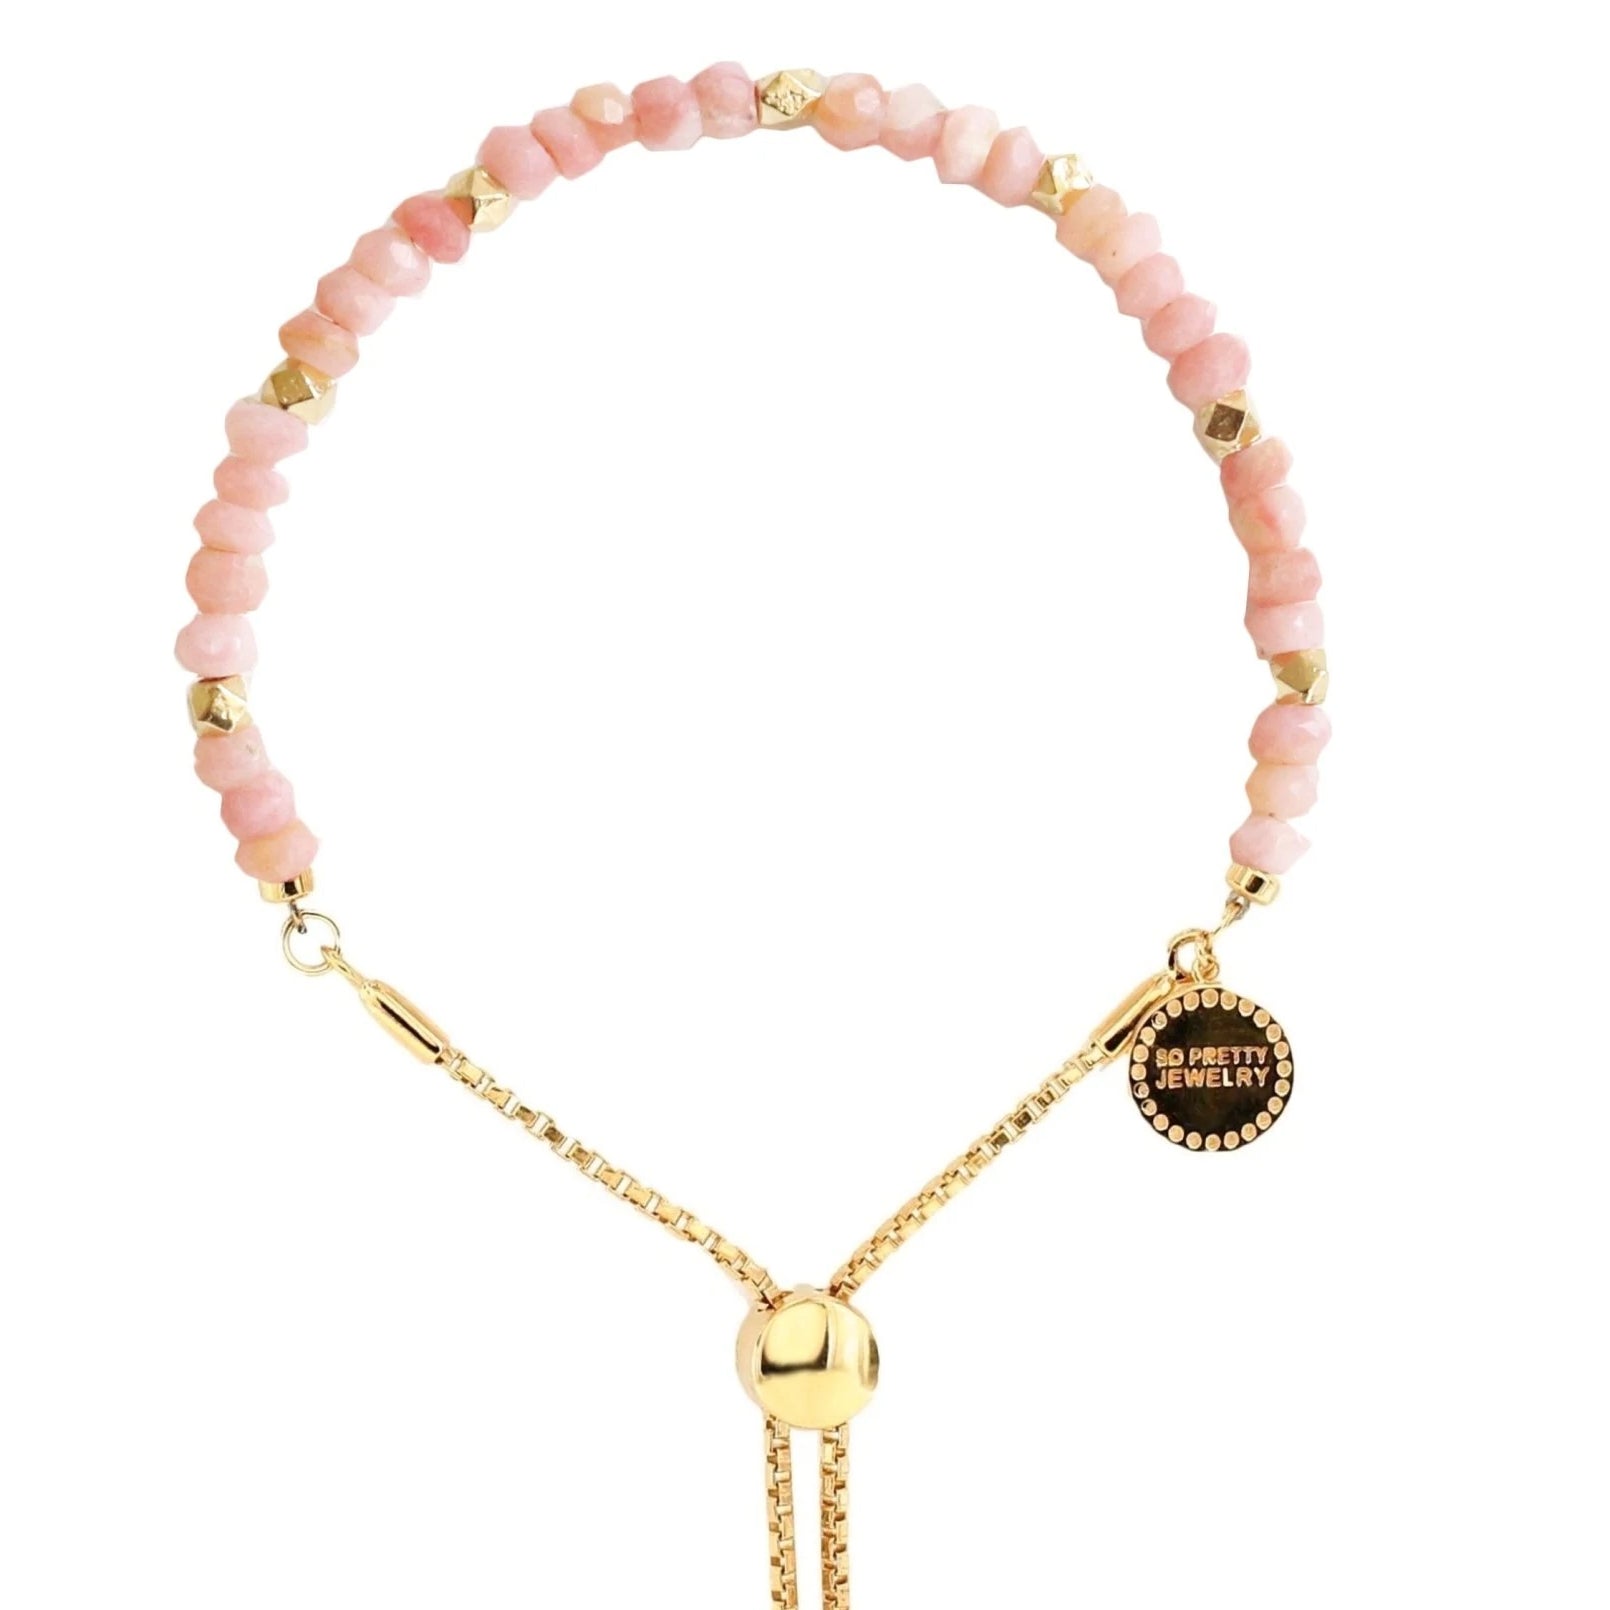 ICONIC ADJUSTABLE NUGGET BRACELET - PINK OPAL & GOLD - SO PRETTY CARA COTTER